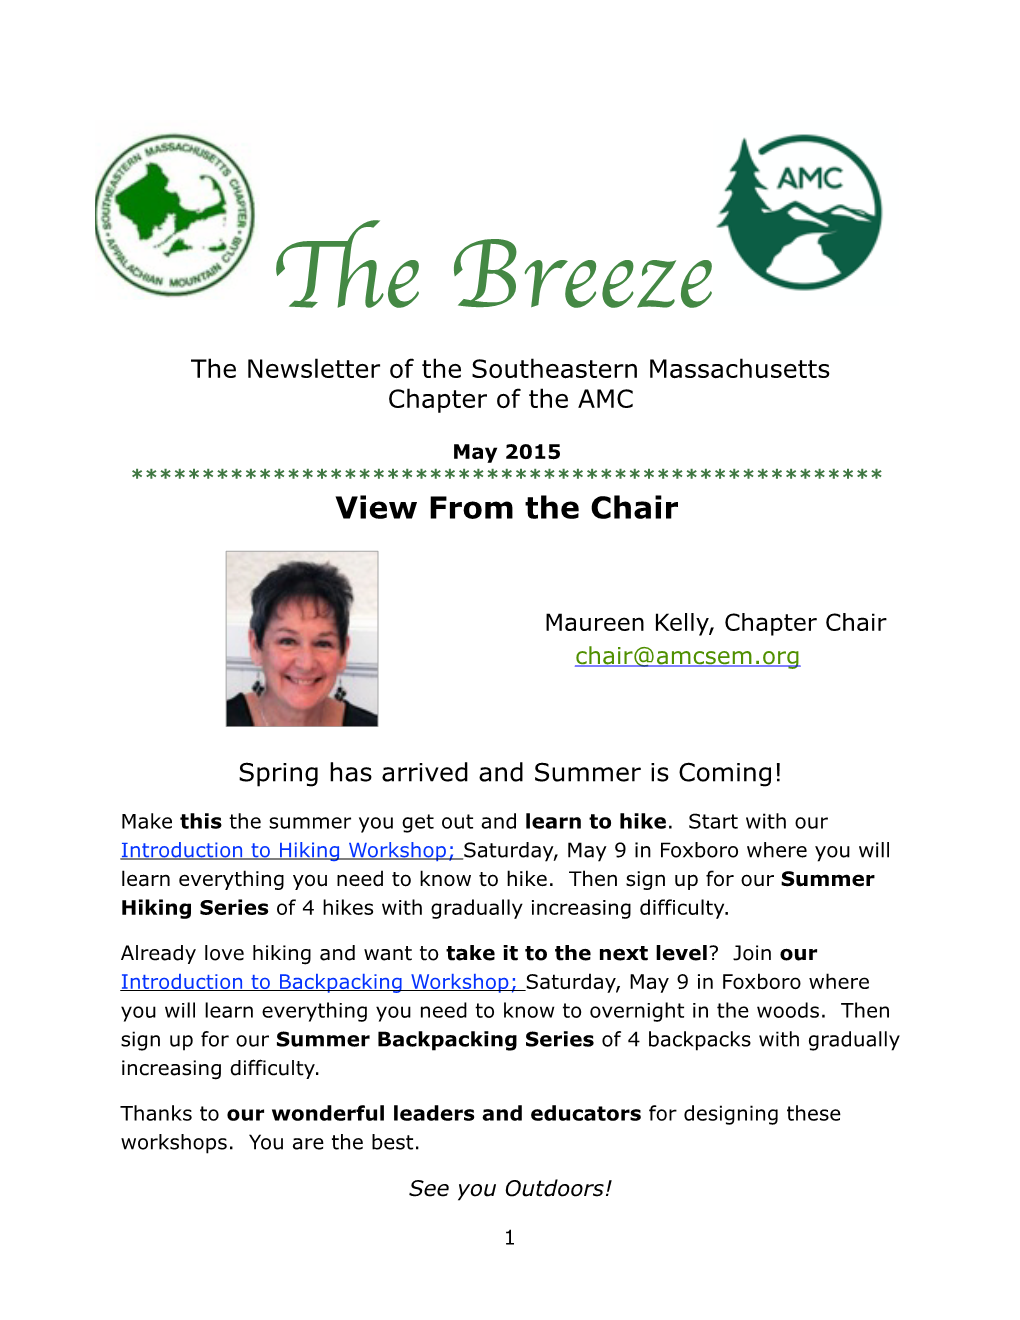 The Breeze and Our Website